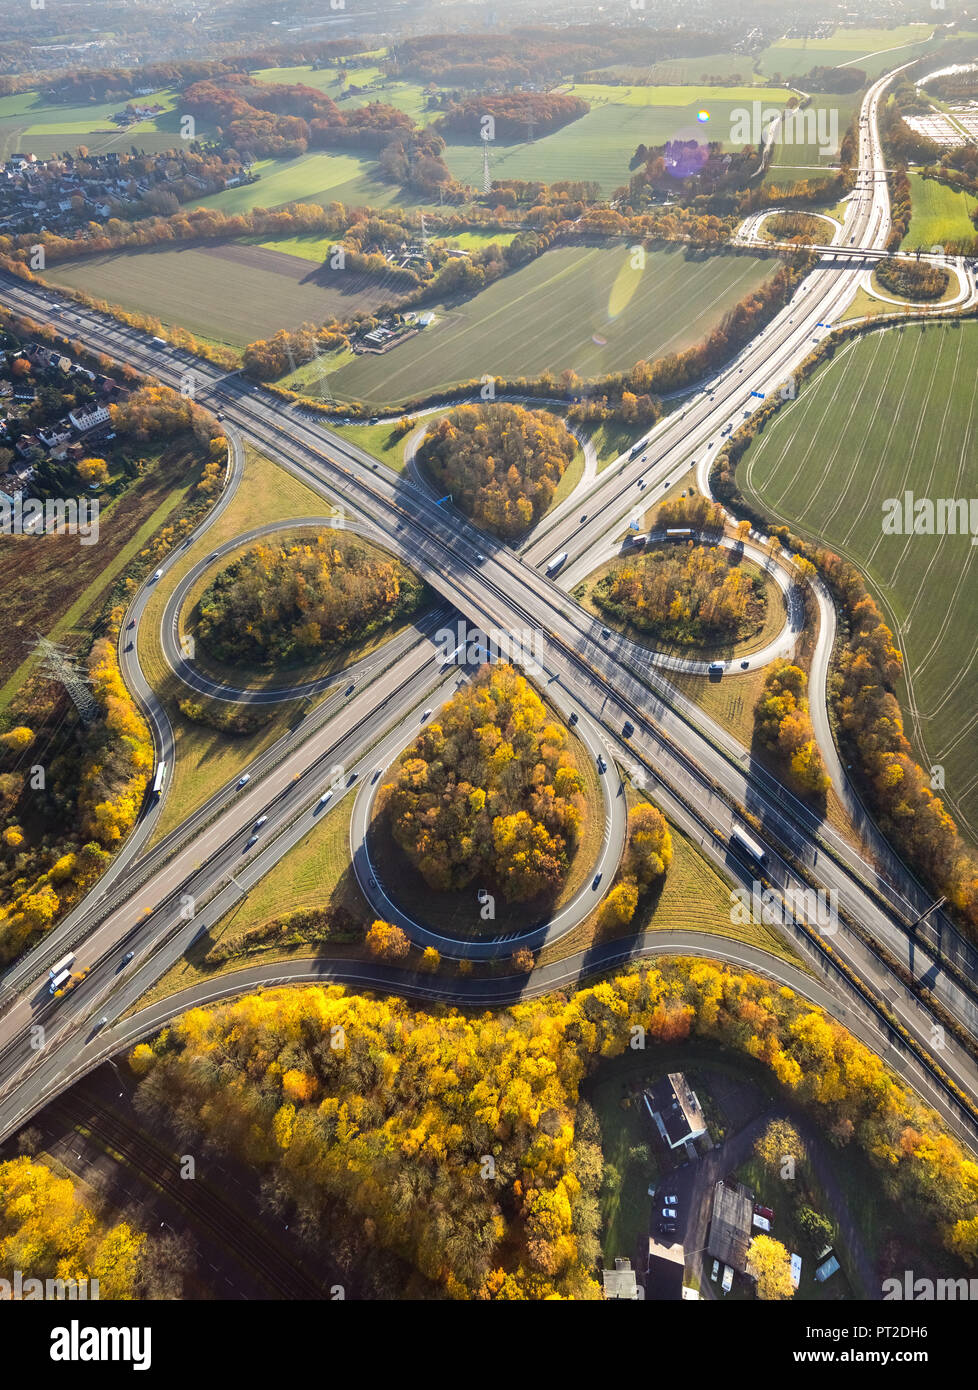 future commercial area at the interchange A43 and A448 Intersection Querenburg, Bochum, Ruhr area, North Rhine-Westphalia, Germany Stock Photo